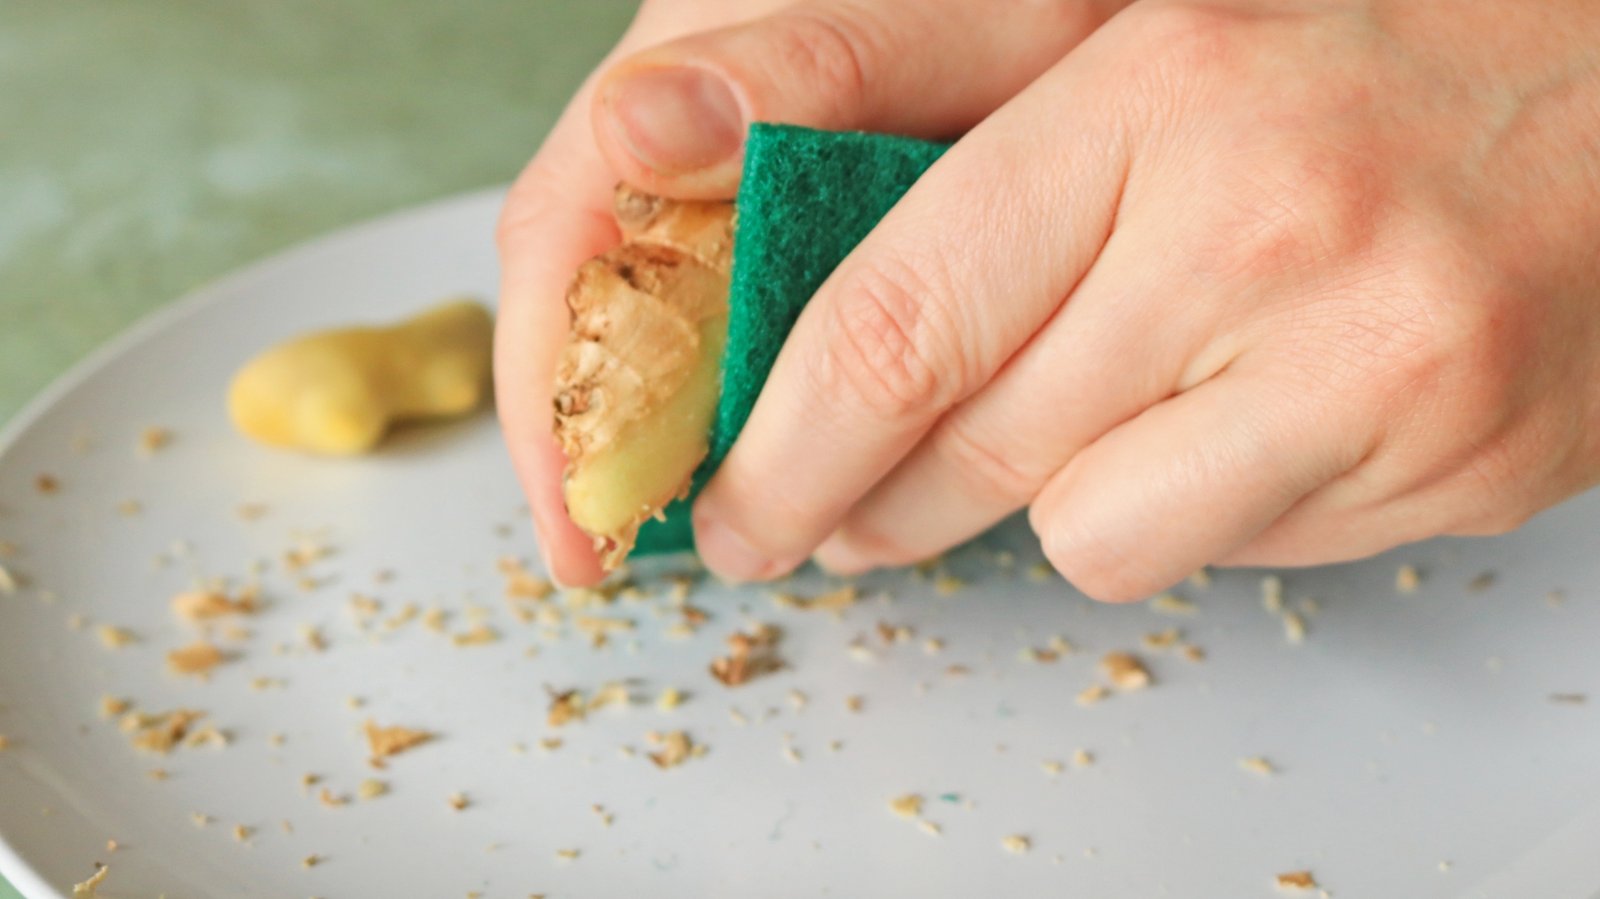 Hand scrubbing ginger root with a green abrasive pad.